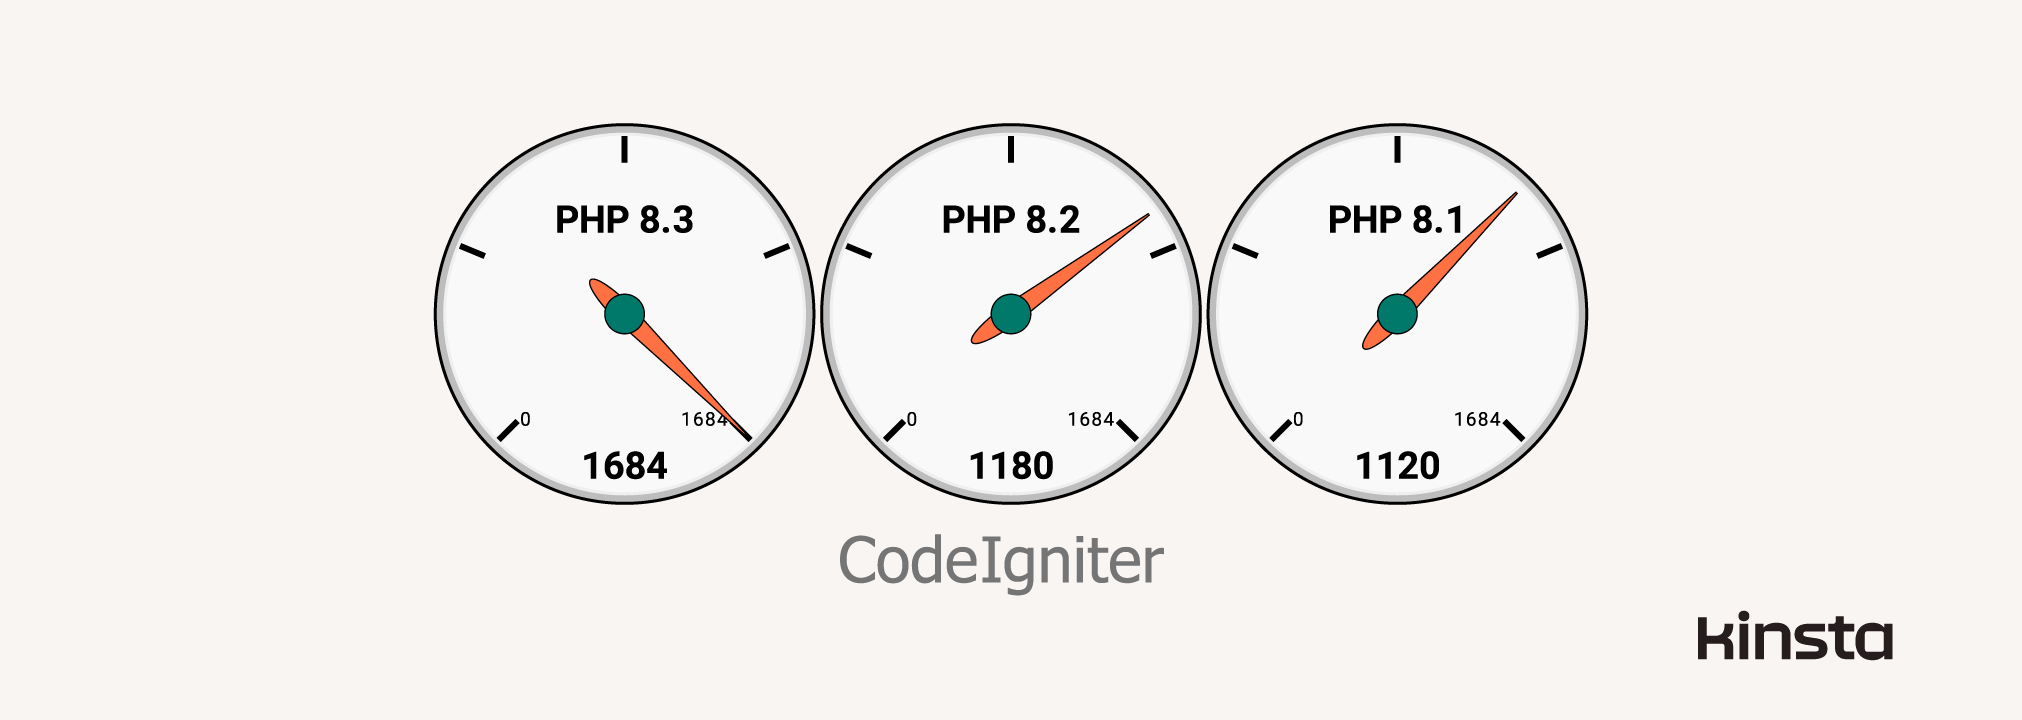 CodeIgniter 4.3.6 performance on PHP 8.1, 8.2, and 8.3 (in requests/second).